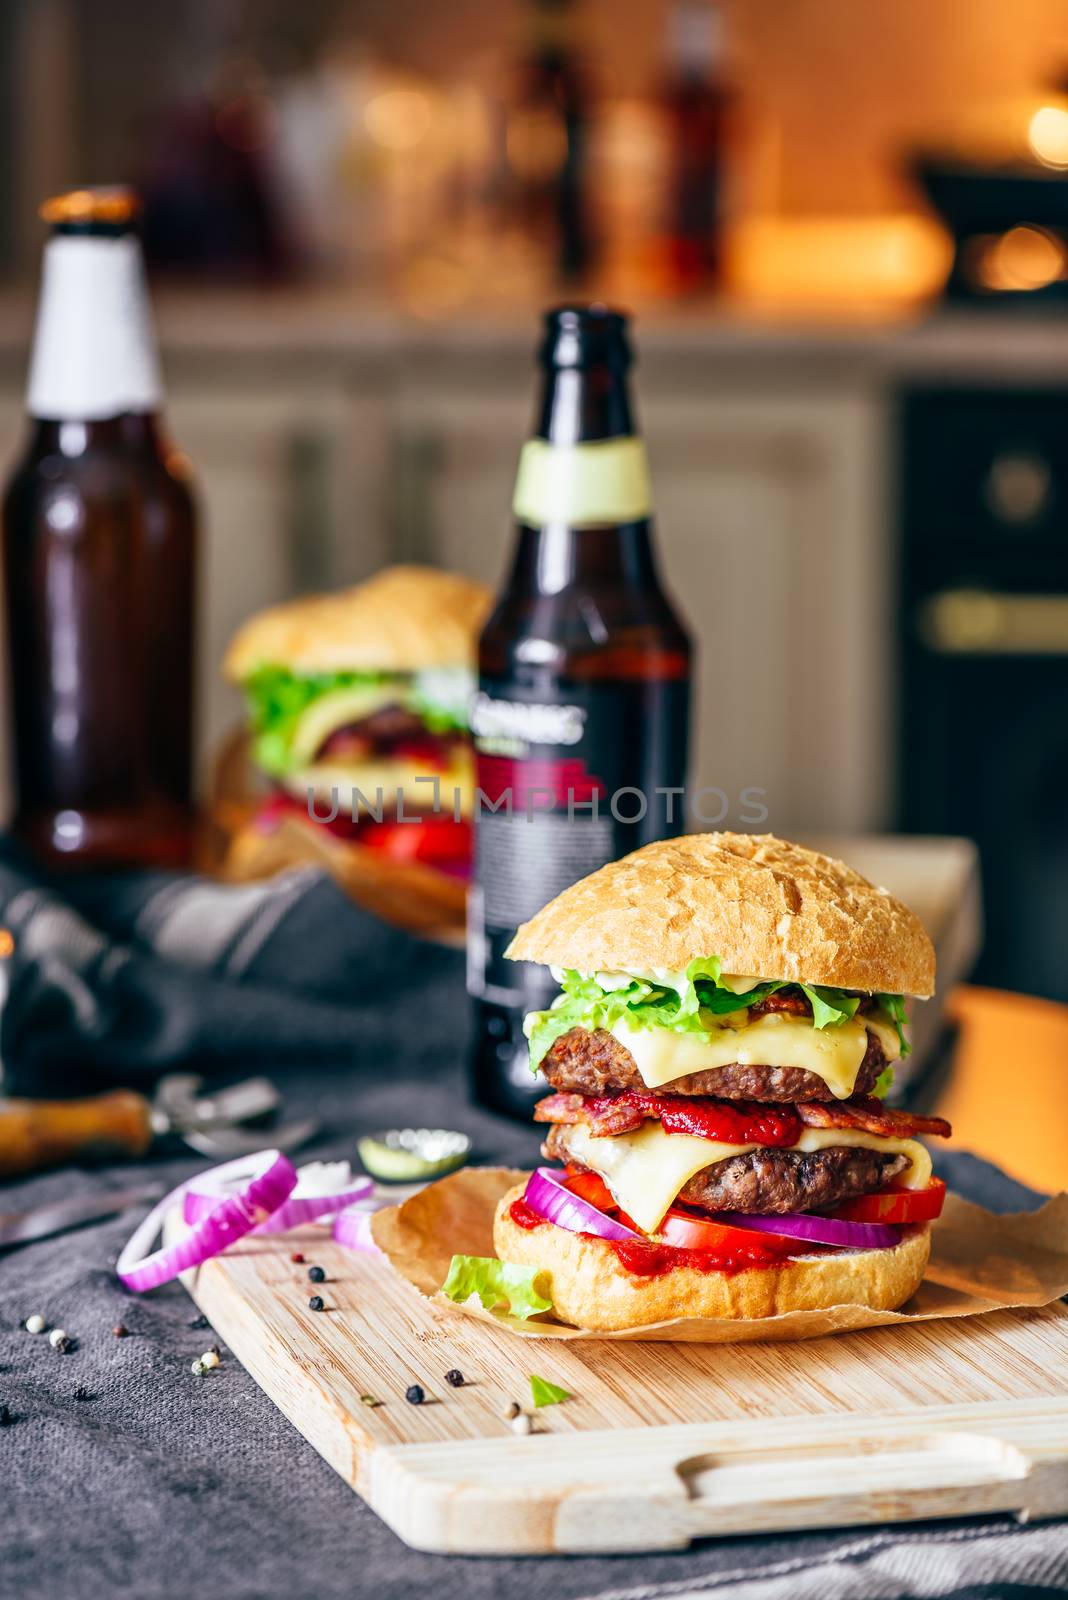 Cheeseburger with Beer and Some Ingredients. by Seva_blsv